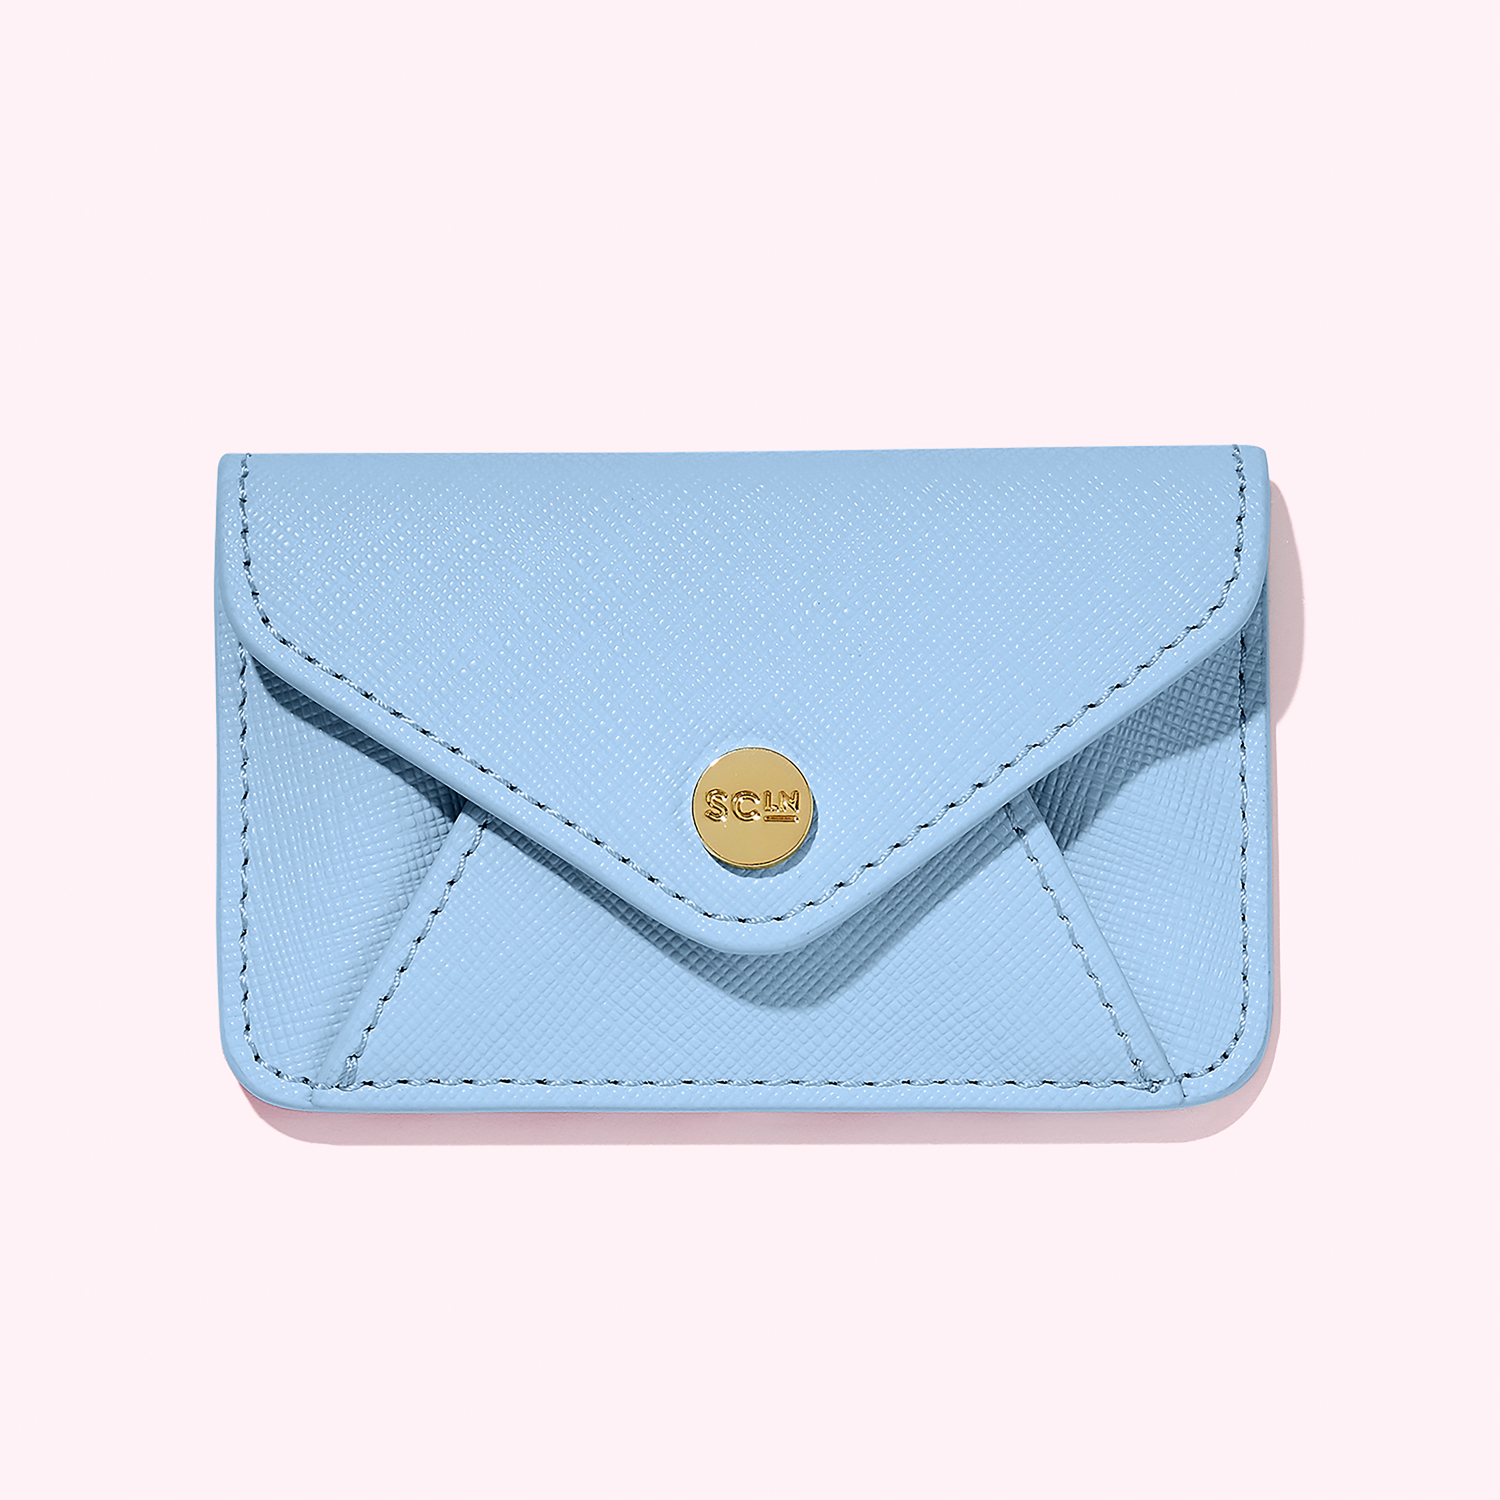 NEW Cell Phone Purse for Women, Multi Card Holder, Mini Messenger Shoulder  Bag Wallet with Credit Card Slots - FromOcean.com